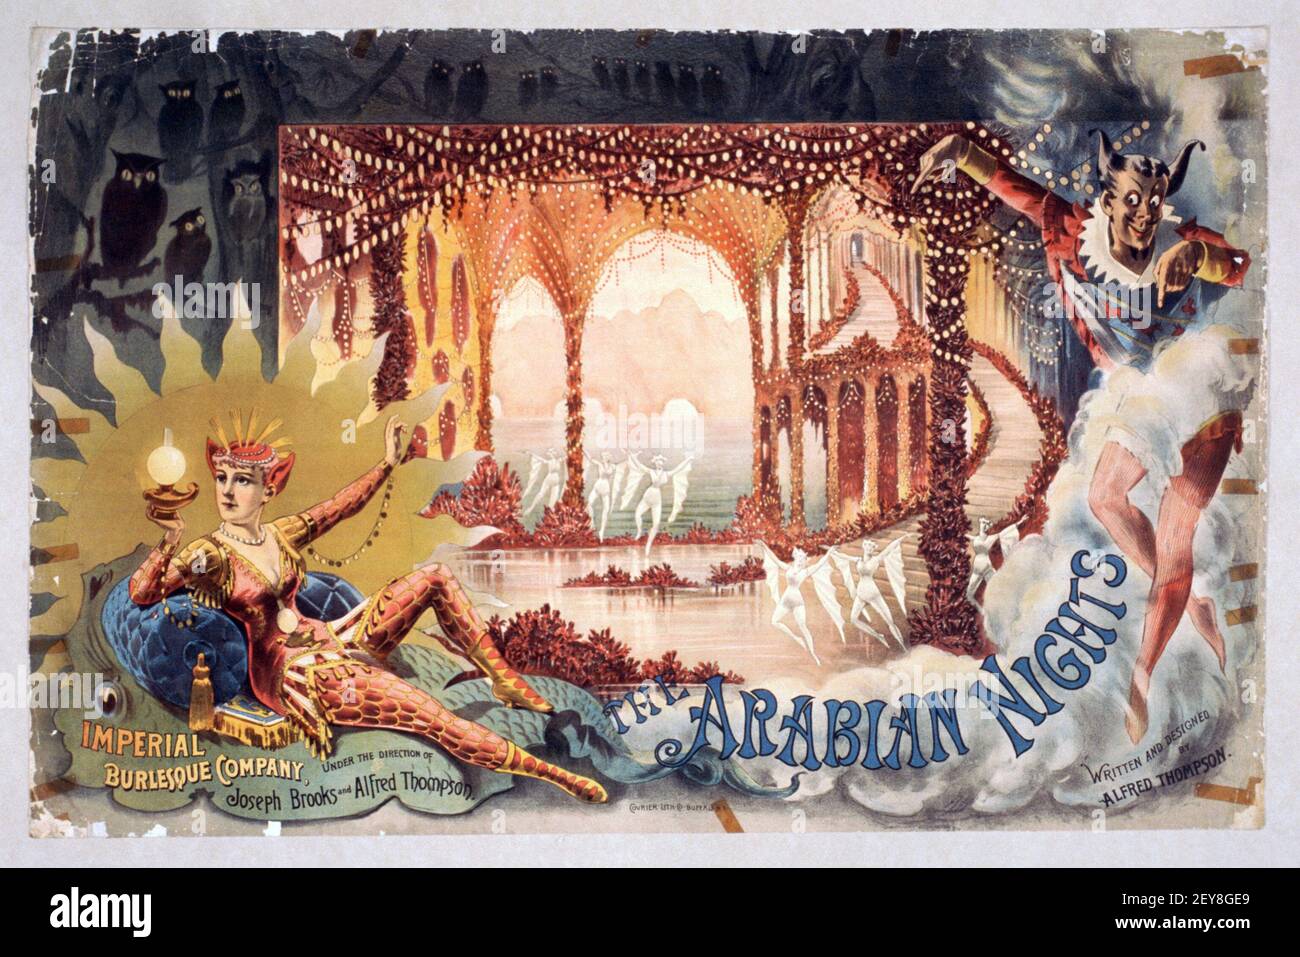 The Arabian Nights. Imperial Burlesque Company. Poster, antique and old style. 1888. Stock Photo